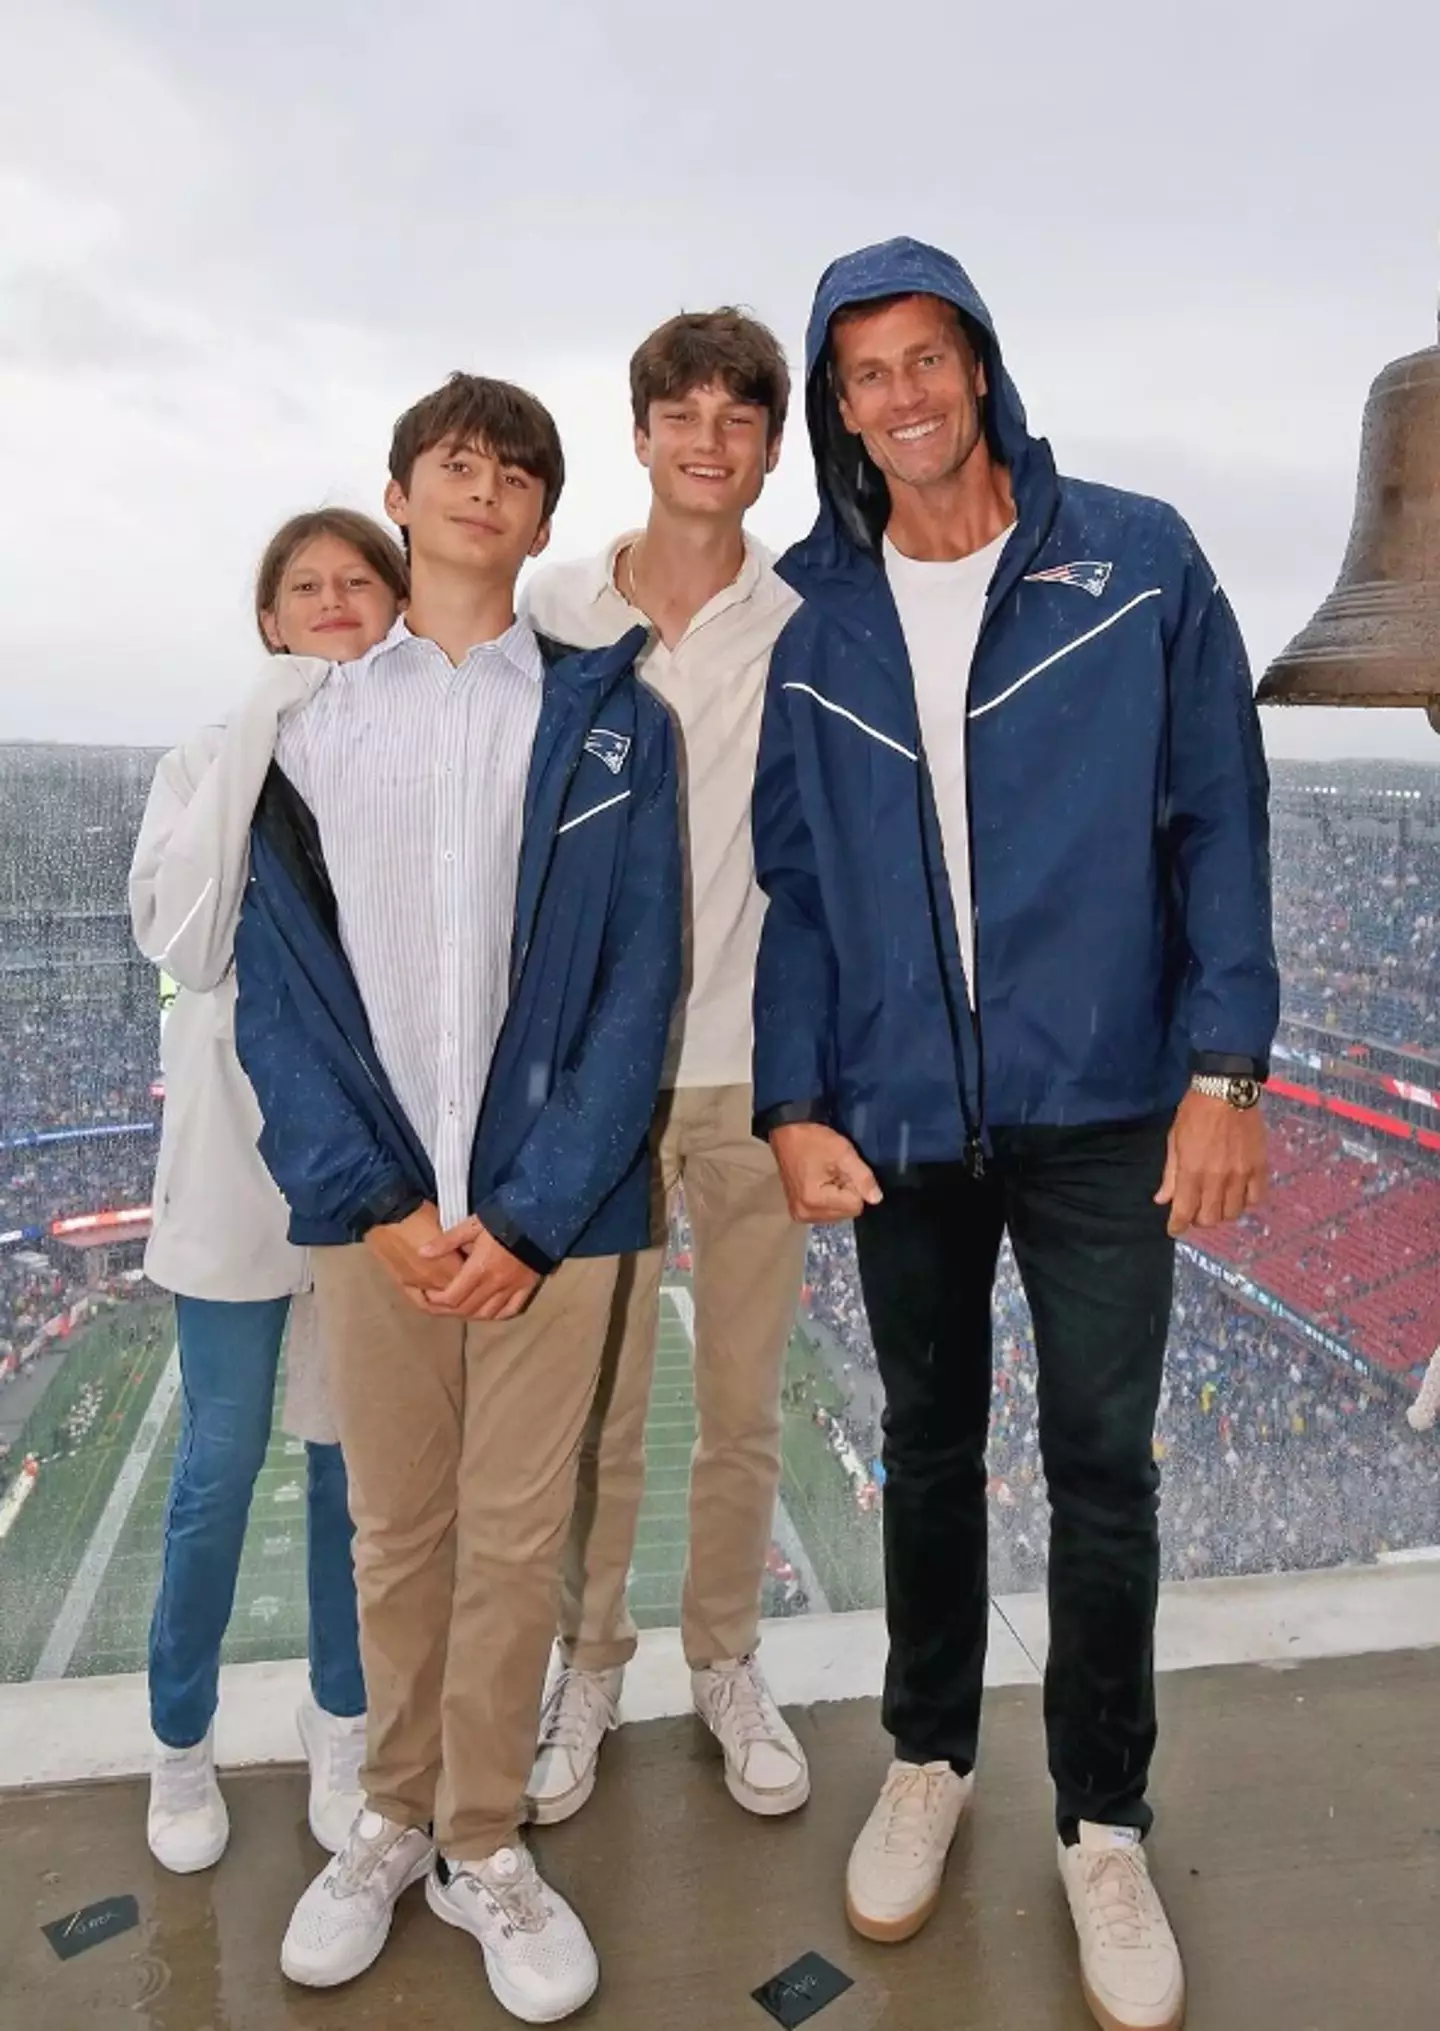 Brady and his kids at a New England Patriots game.